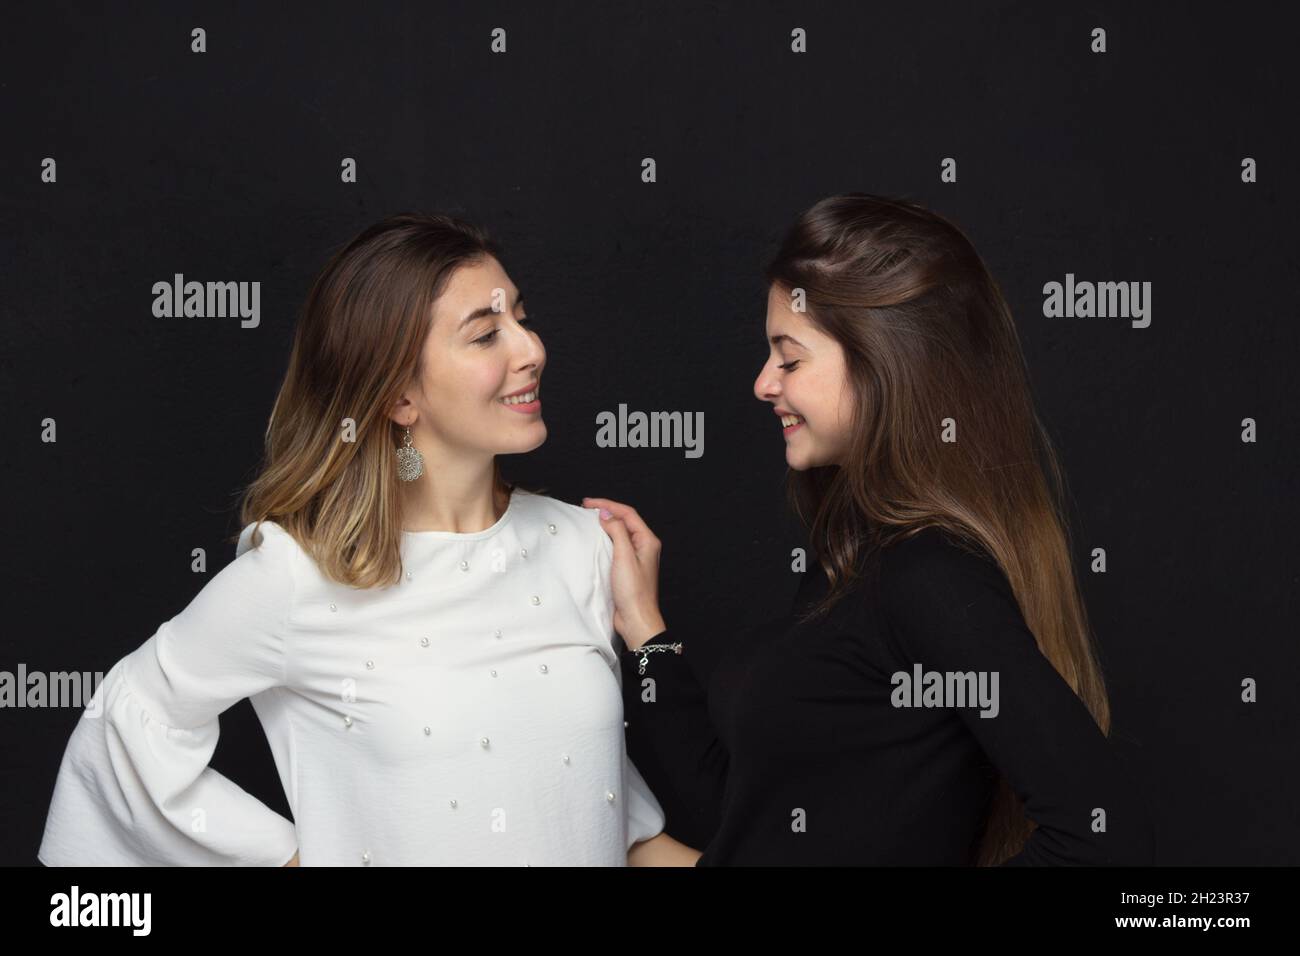 Portrait of two happy women friends with loving gestures laughing on a black background - Concept of friendship Stock Photo